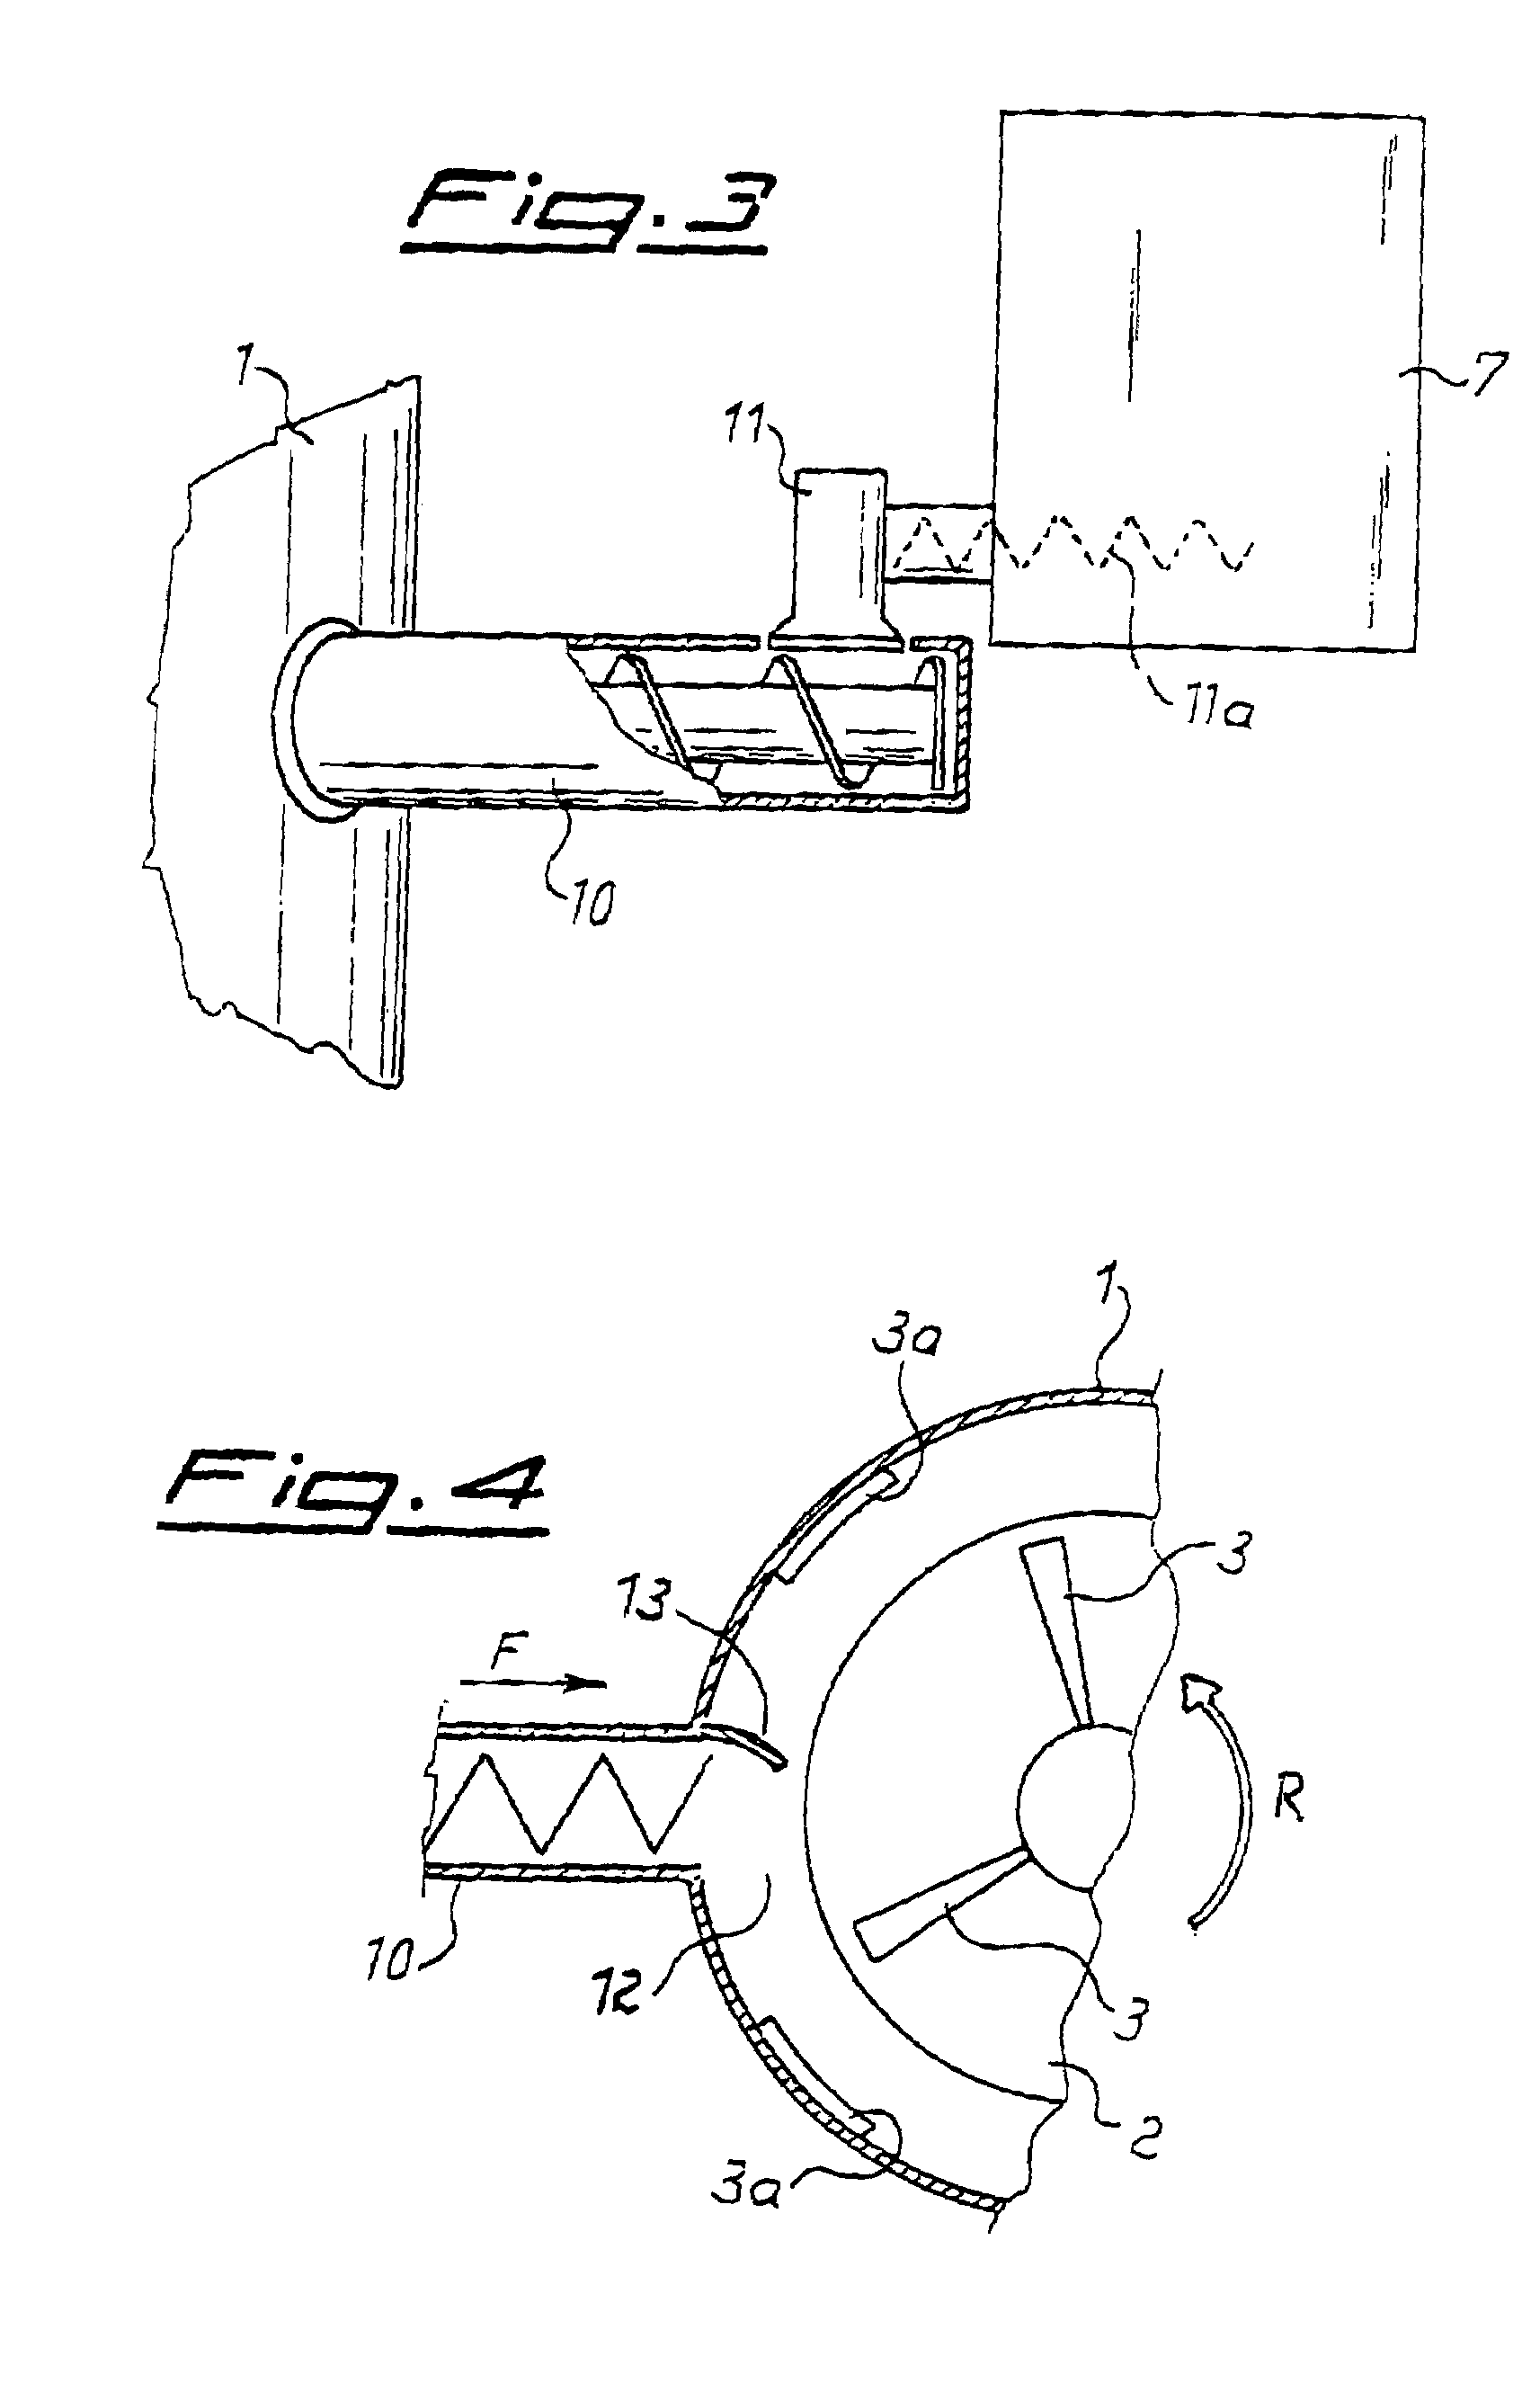 Process and apparatus for the production of filled thermoplastic polymers